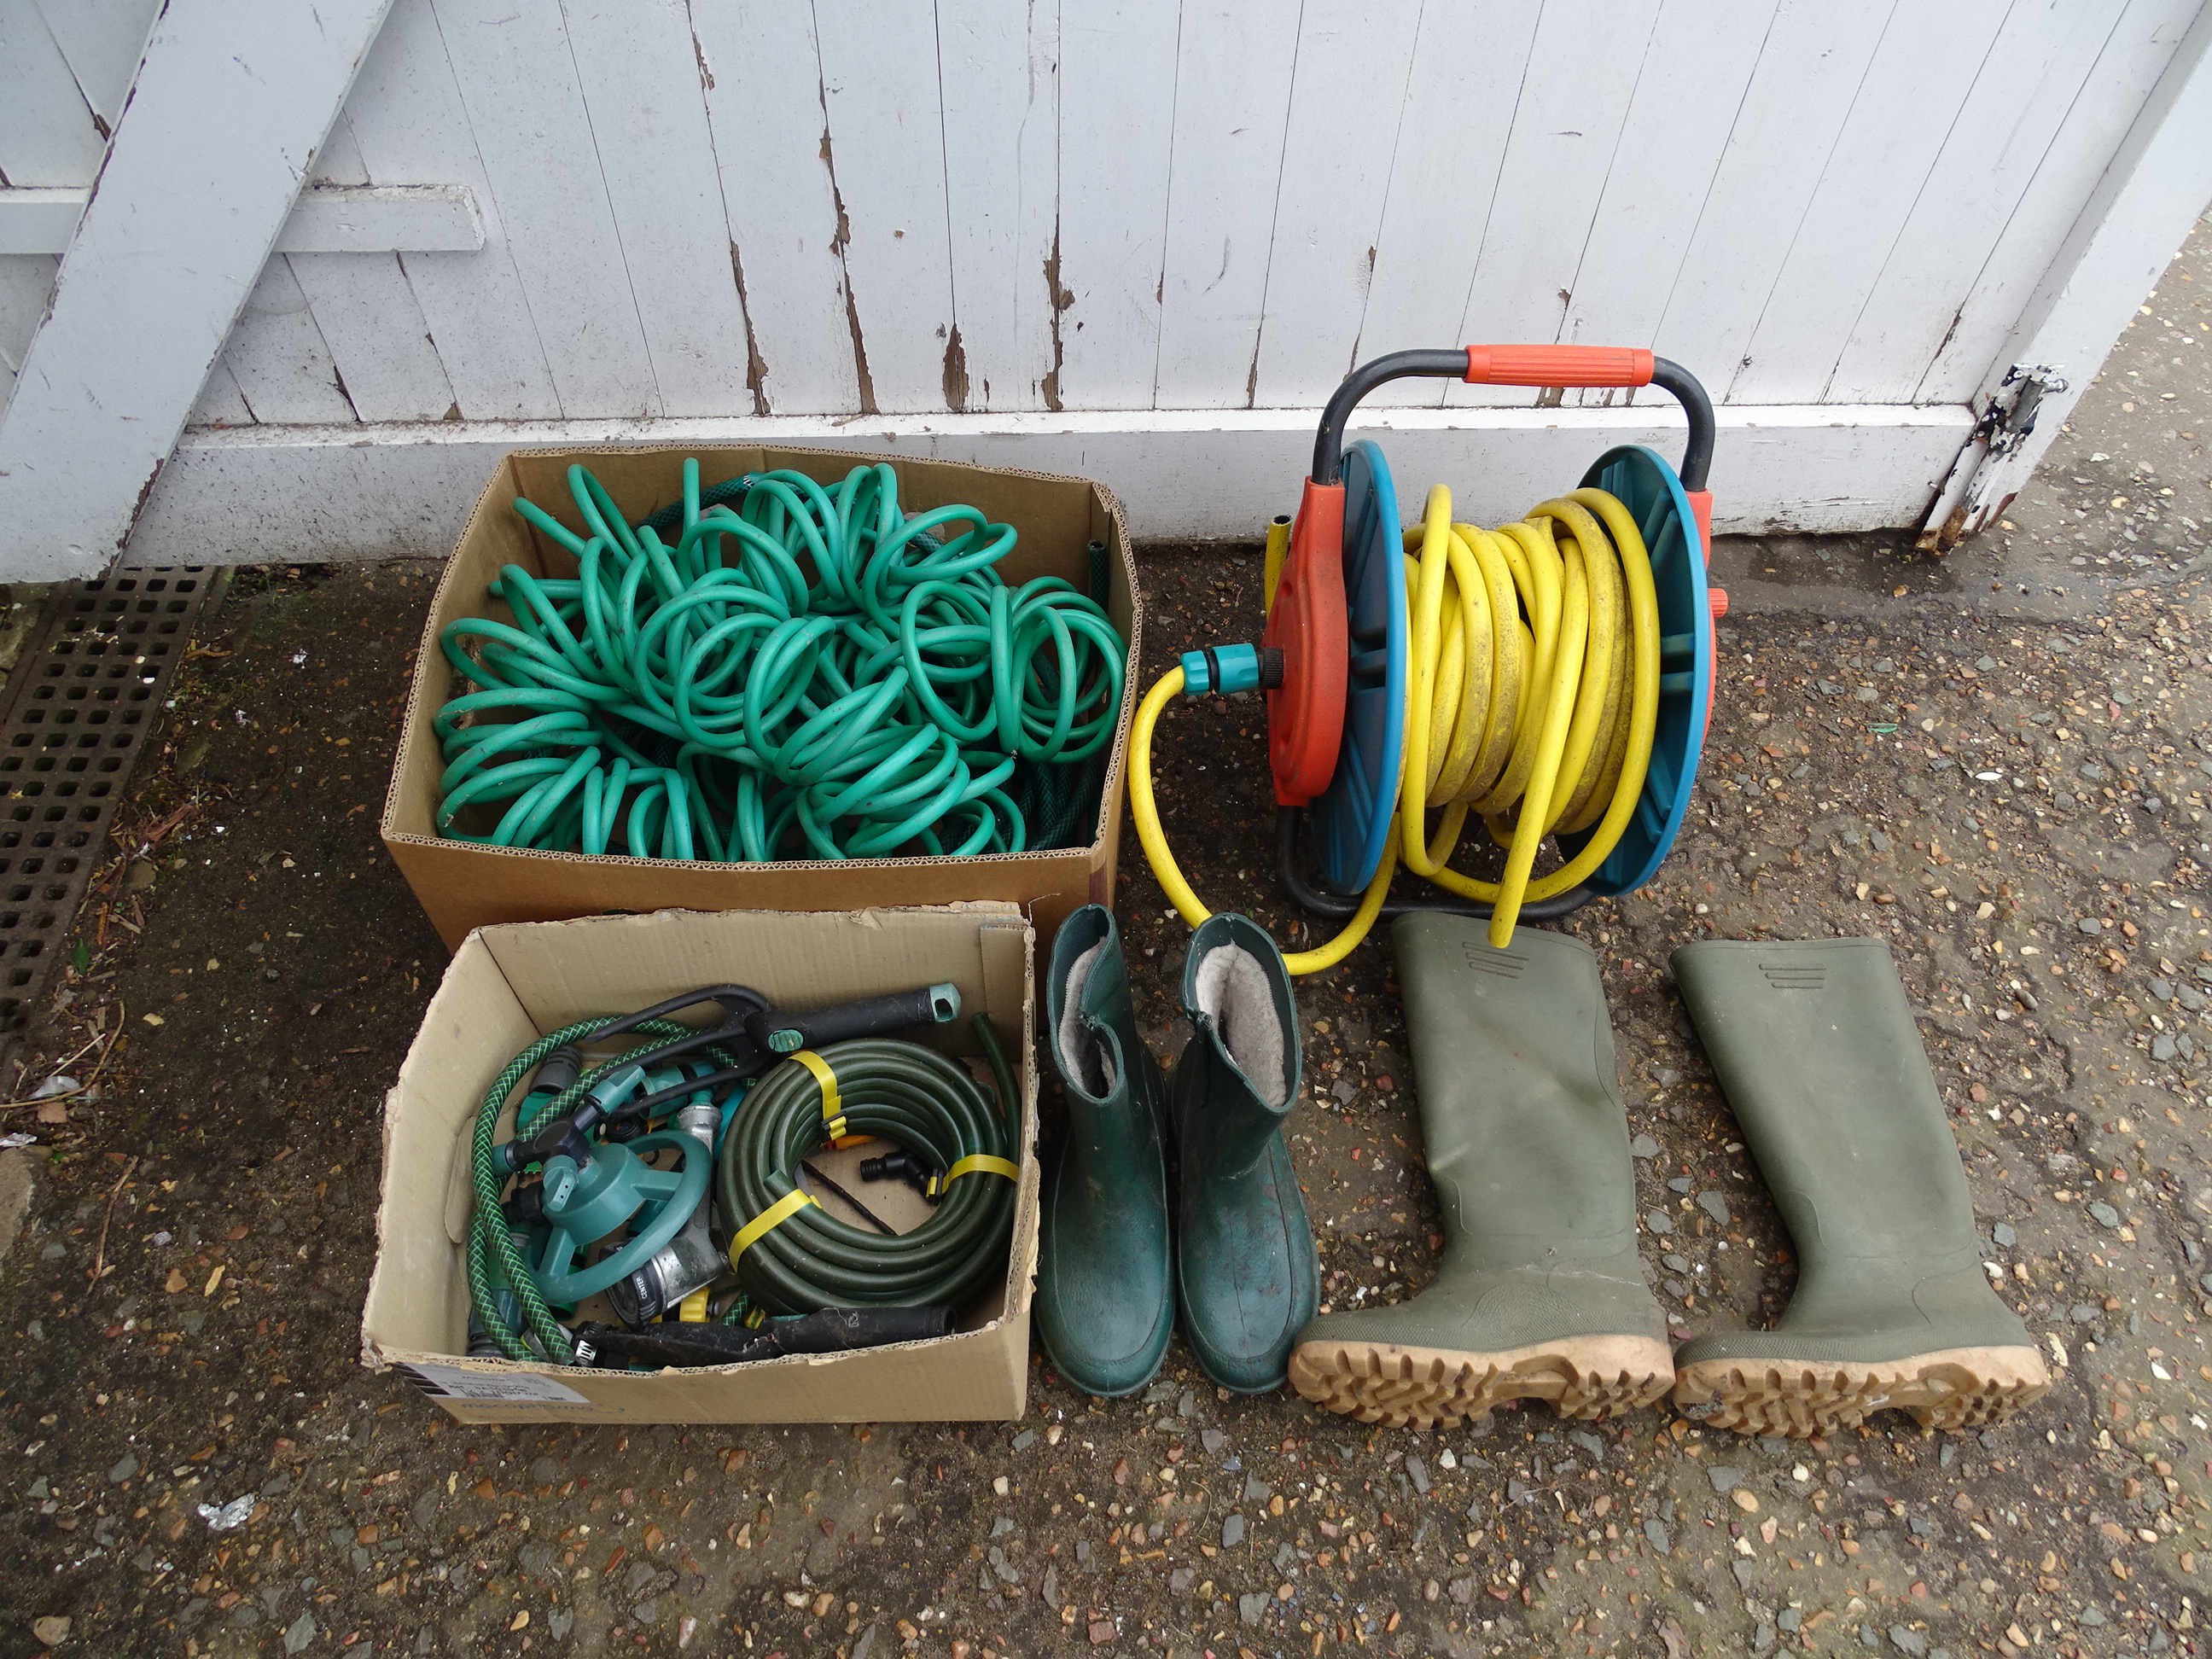 Hose with reel and hose fittings etc